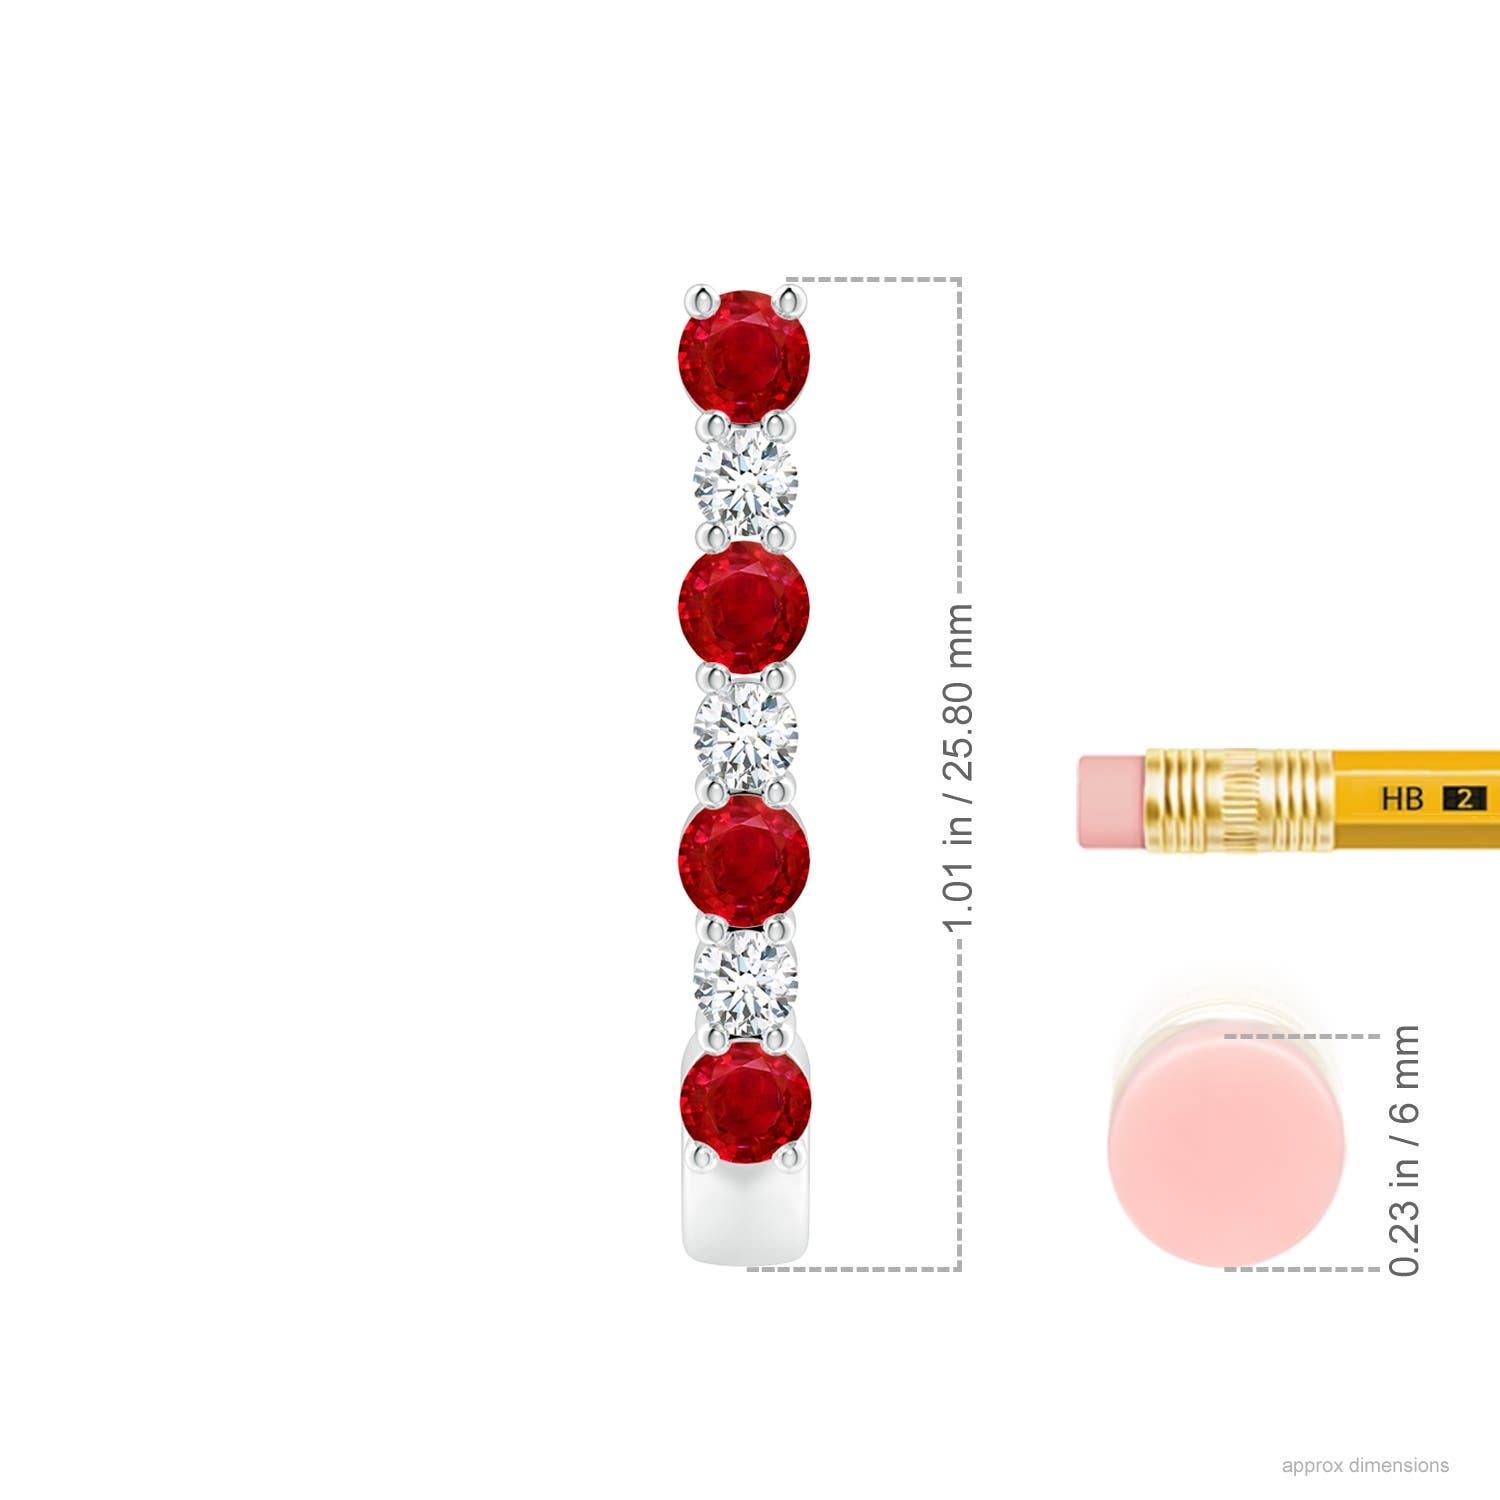 These stunning ruby and diamond hoop earrings are exquisitely crafted in platinum. The J hoops are alternately studded with bright red rubies and sparkling diamonds for a captivating effect.
Ruby is the Birthstone for July and traditional gift for